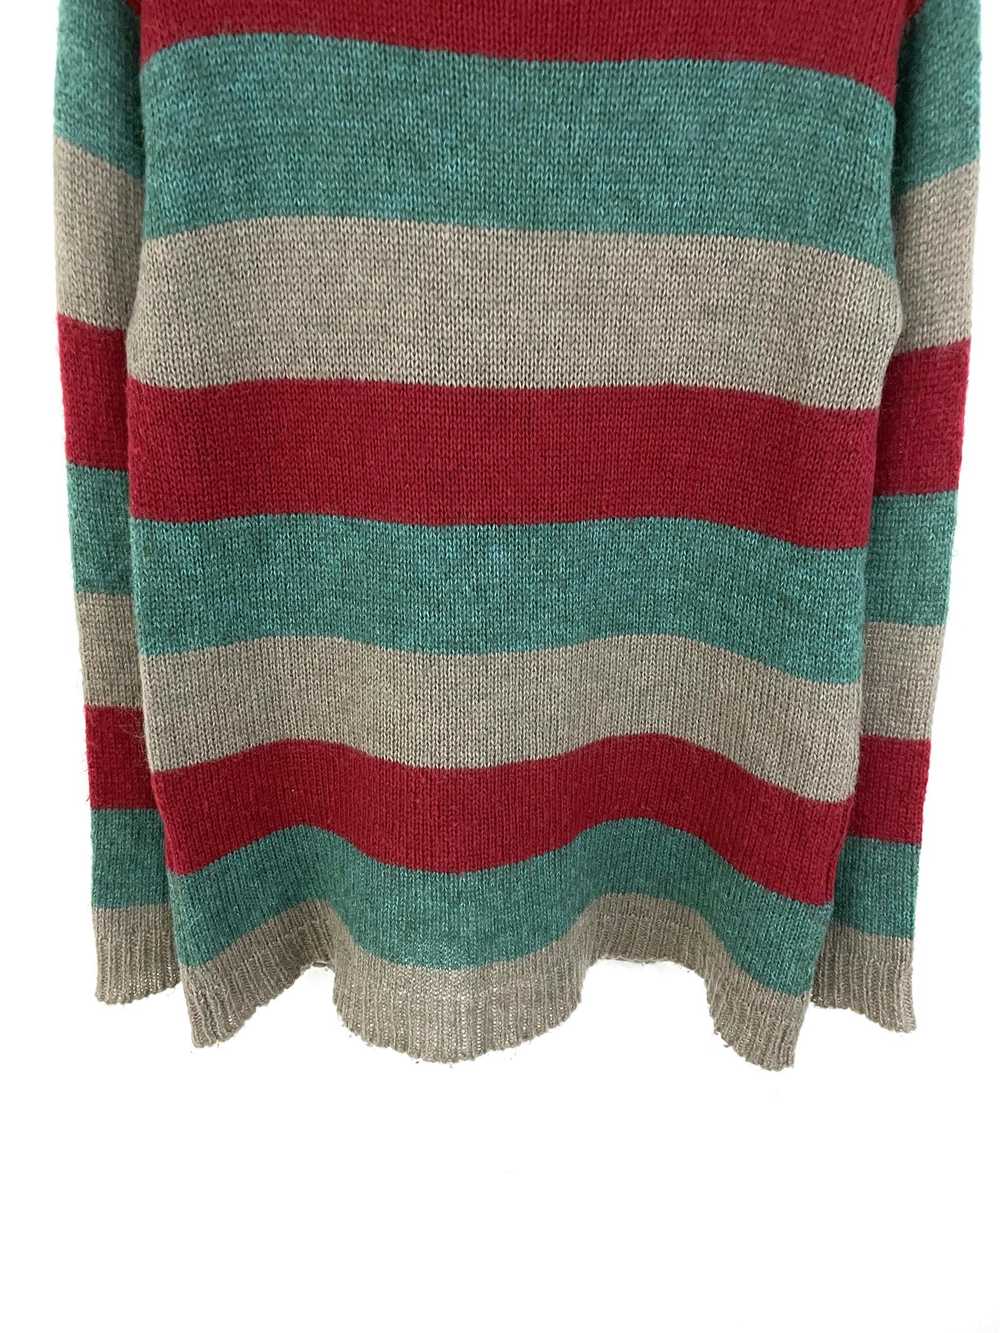 Undercover AW05 Arts & Crafts Mohair Sweater - image 4